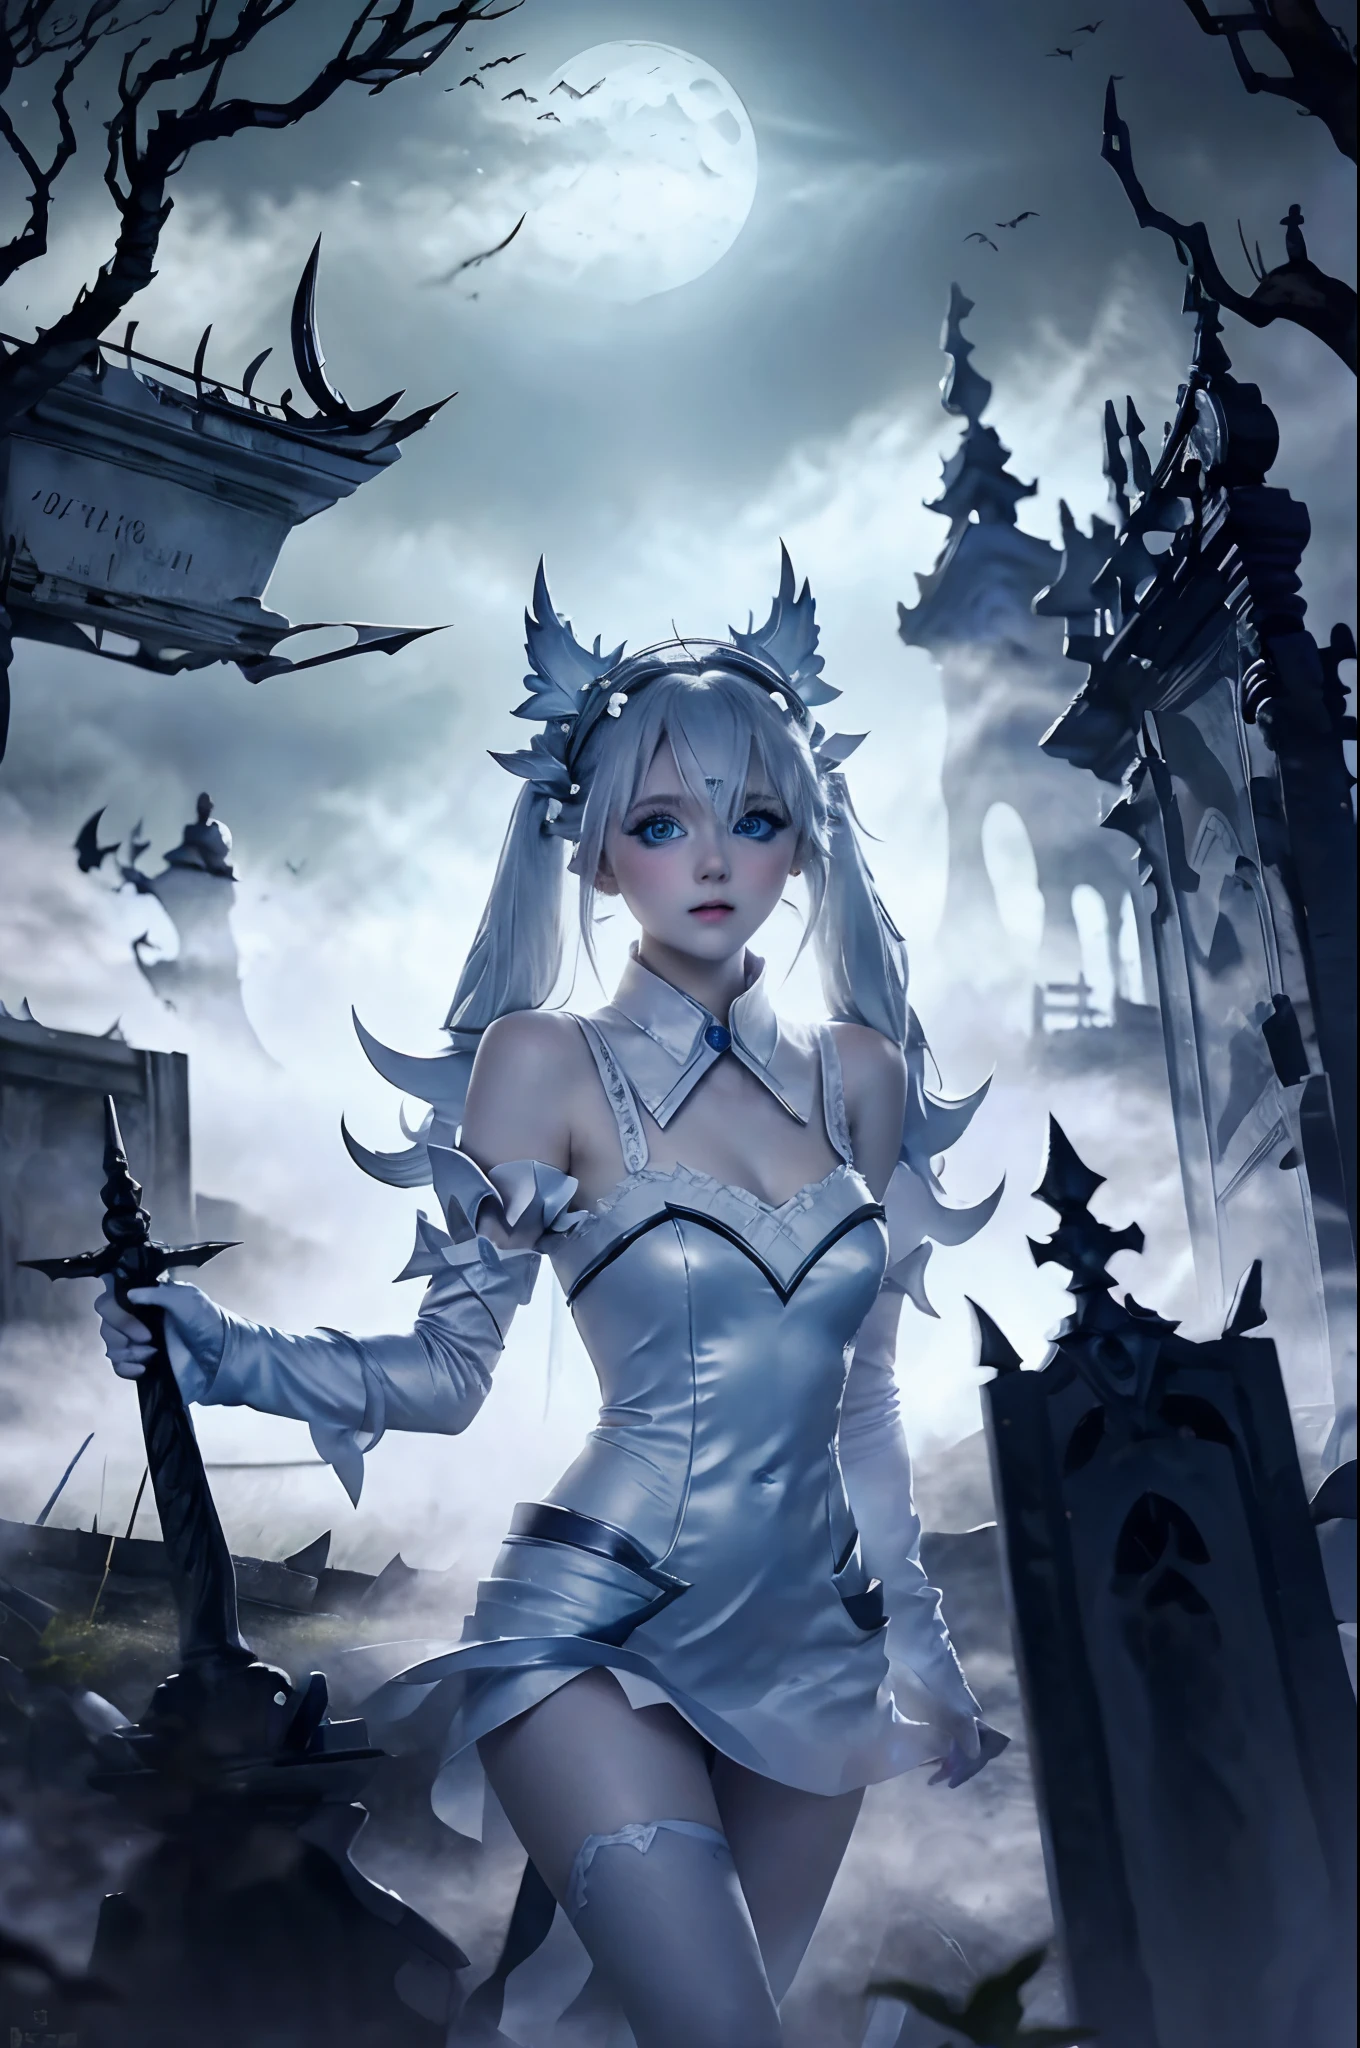 (masterpiece) (high quality, extra detailed, 4k) create a cosplay girl dressed as ghost, white hair, pale skin, big blue eyes, delicate face, halloween inspired costume, anime cosplay, beautifull, halloween scenery, background is cemetery, at night, brume, fog, low light, bats flying at distance, she is looking for her soulmate who died, girl is very beautifull, delicate face, big bright blue eyes, pretty lips, delicate nose, she is in center of image, focus on her face